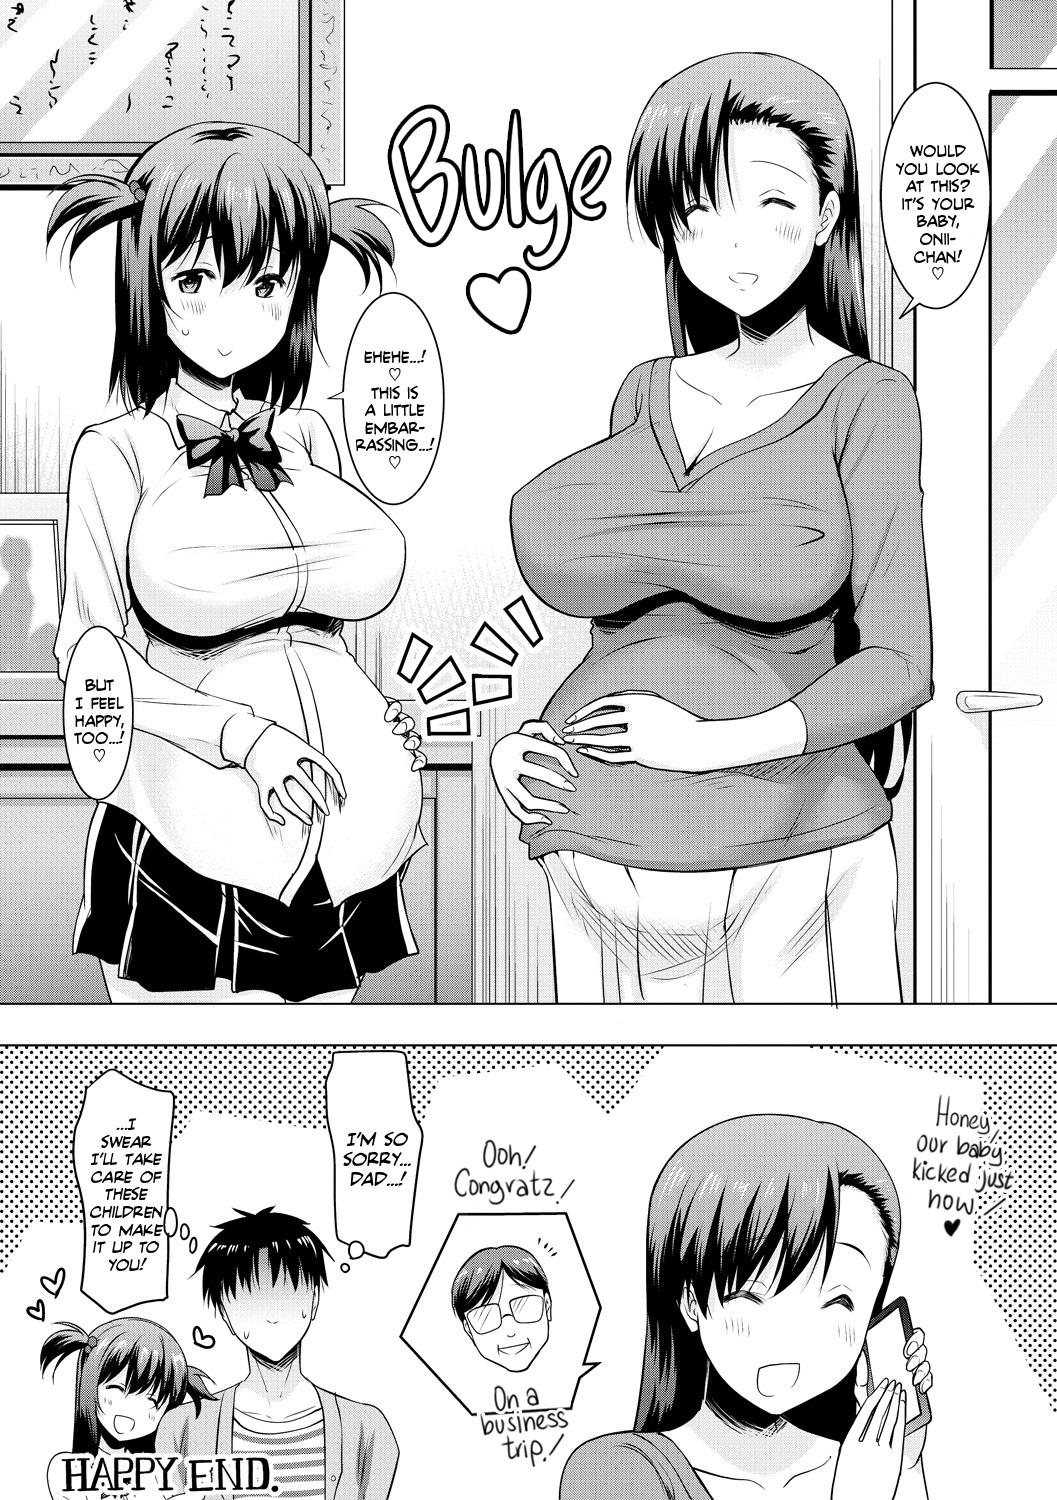 [Pony-R] I Can't Live Without My Little Sister's Tongue Chapter 01-02 + Secret Baby-making Sex with a Big-titted Mother and Daughter! (Kyonyuu Oyako no Shita to Shikyuu ni Renzoku Shasei) [English] [Team Rabu2] [Digital] 97